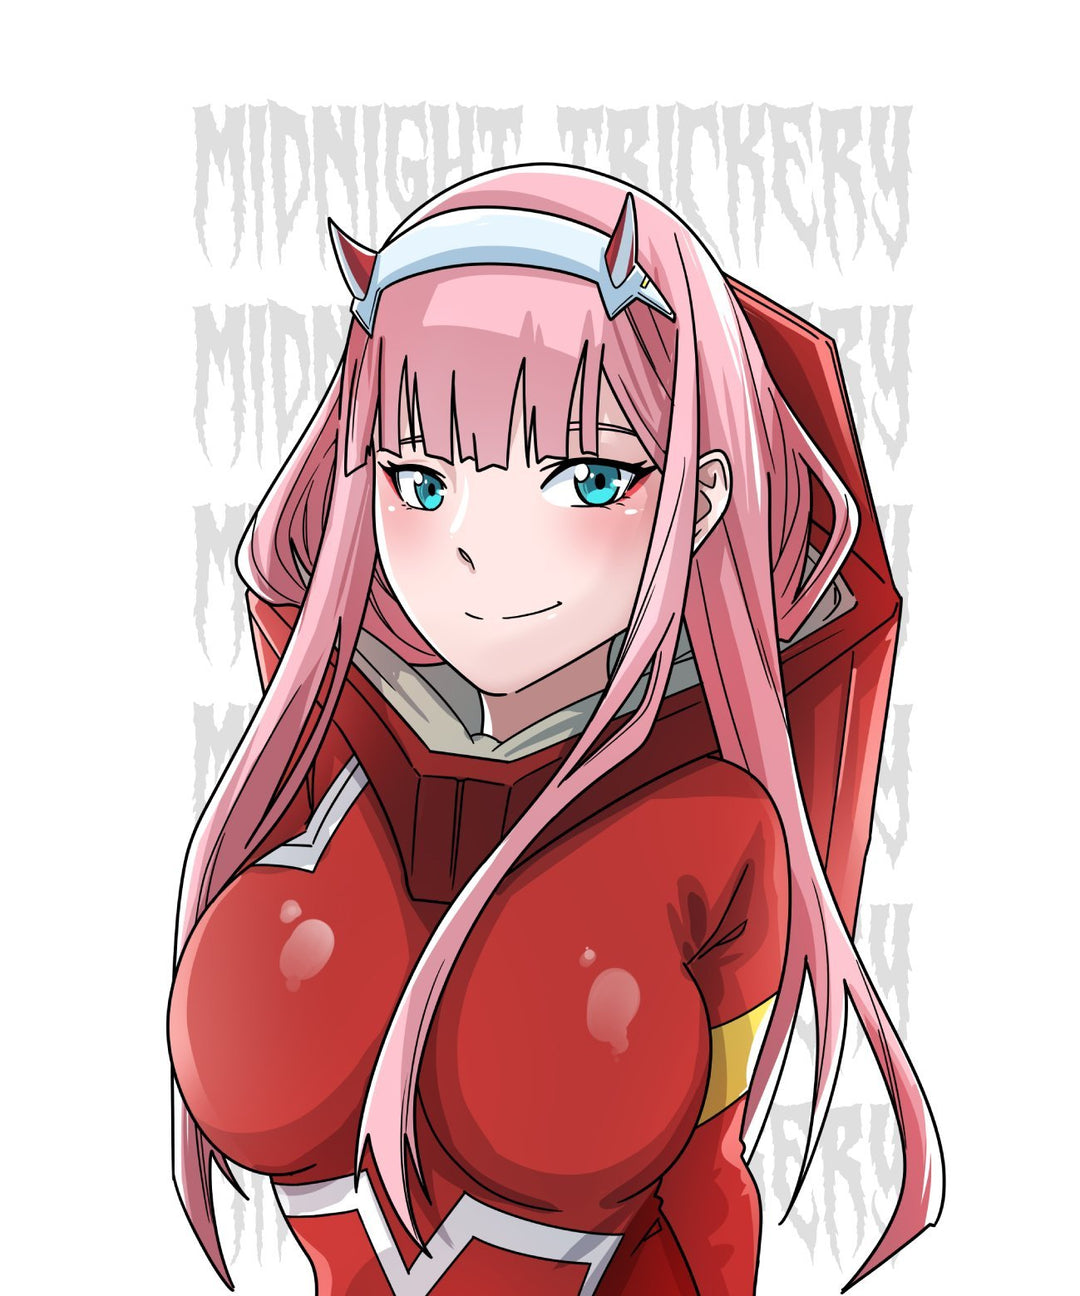 Anime-themed sticker featuring Zero Two from Darling in the Franxx peeking out.